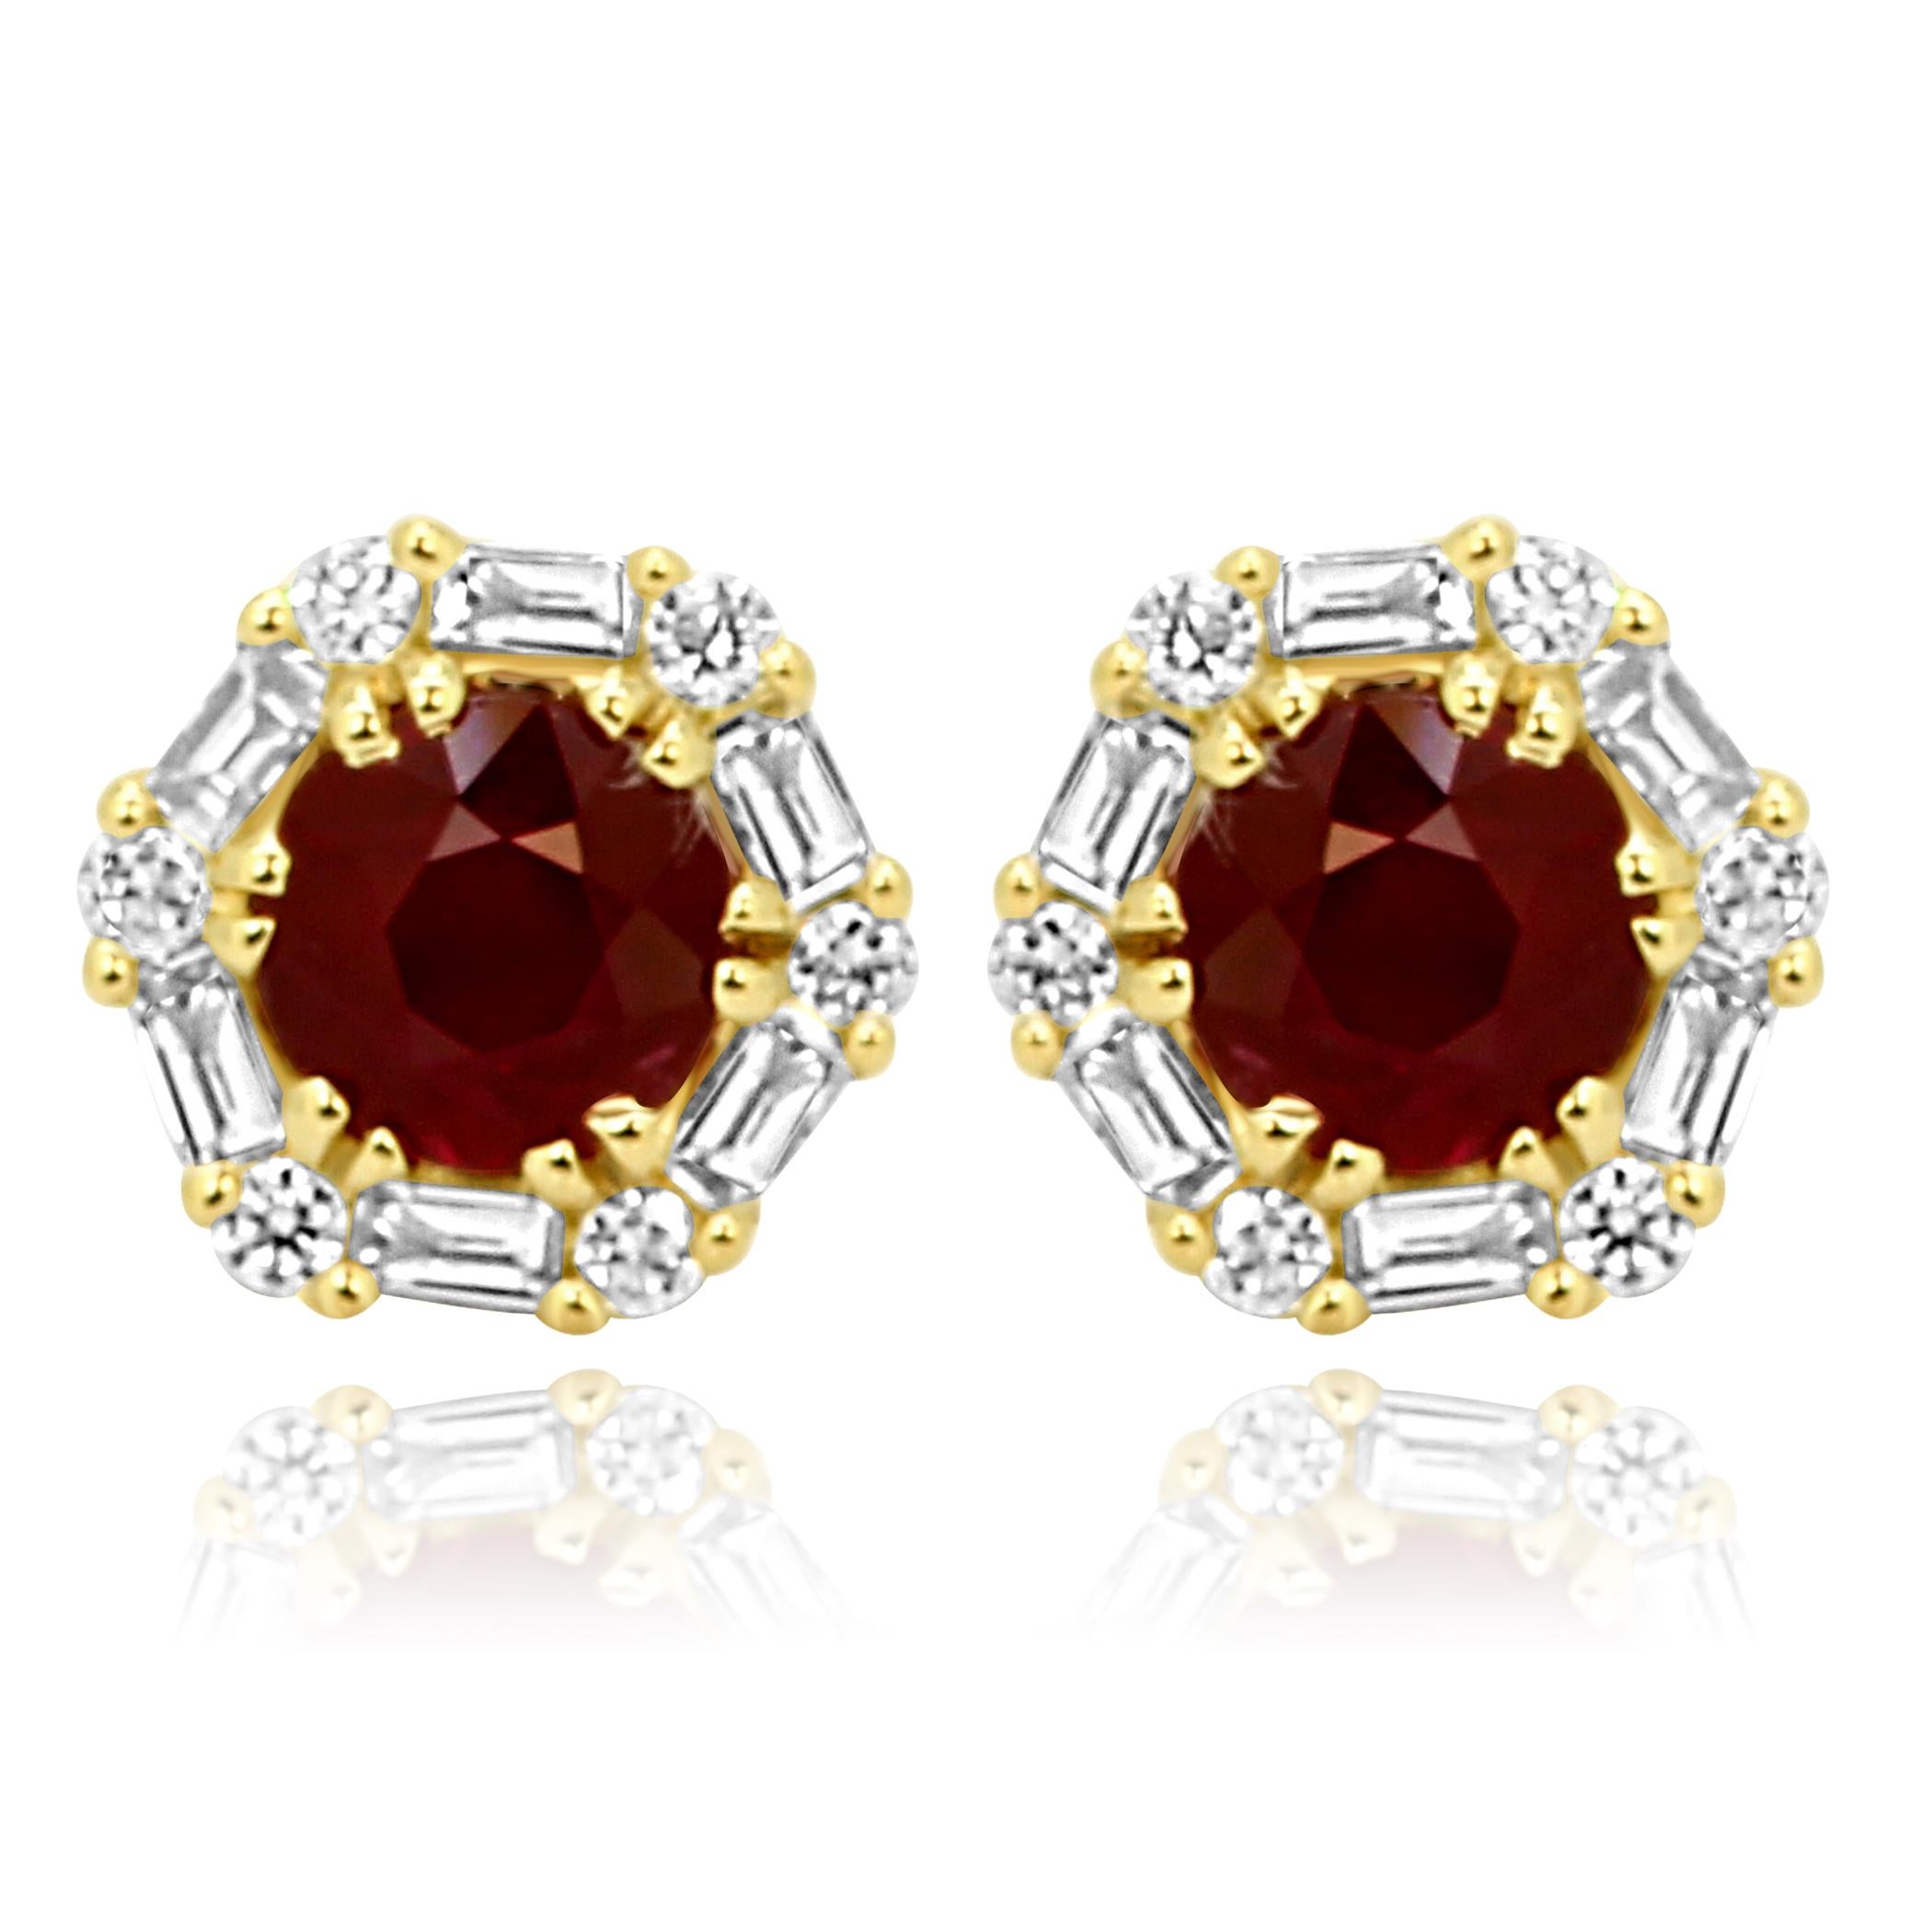 2 Ruby Round 1.36 Carat Encircled in a Halo White Colorless Diamond Round VS Clarity 0.13 Carat and White Colorless Diamond Baguettes VS Clarity 0.25 Carat in 14K Yellow Gold Gorgeous Daily Wear Stud Earring.

2 Center Ruby Weight 1.36 Carat
Total